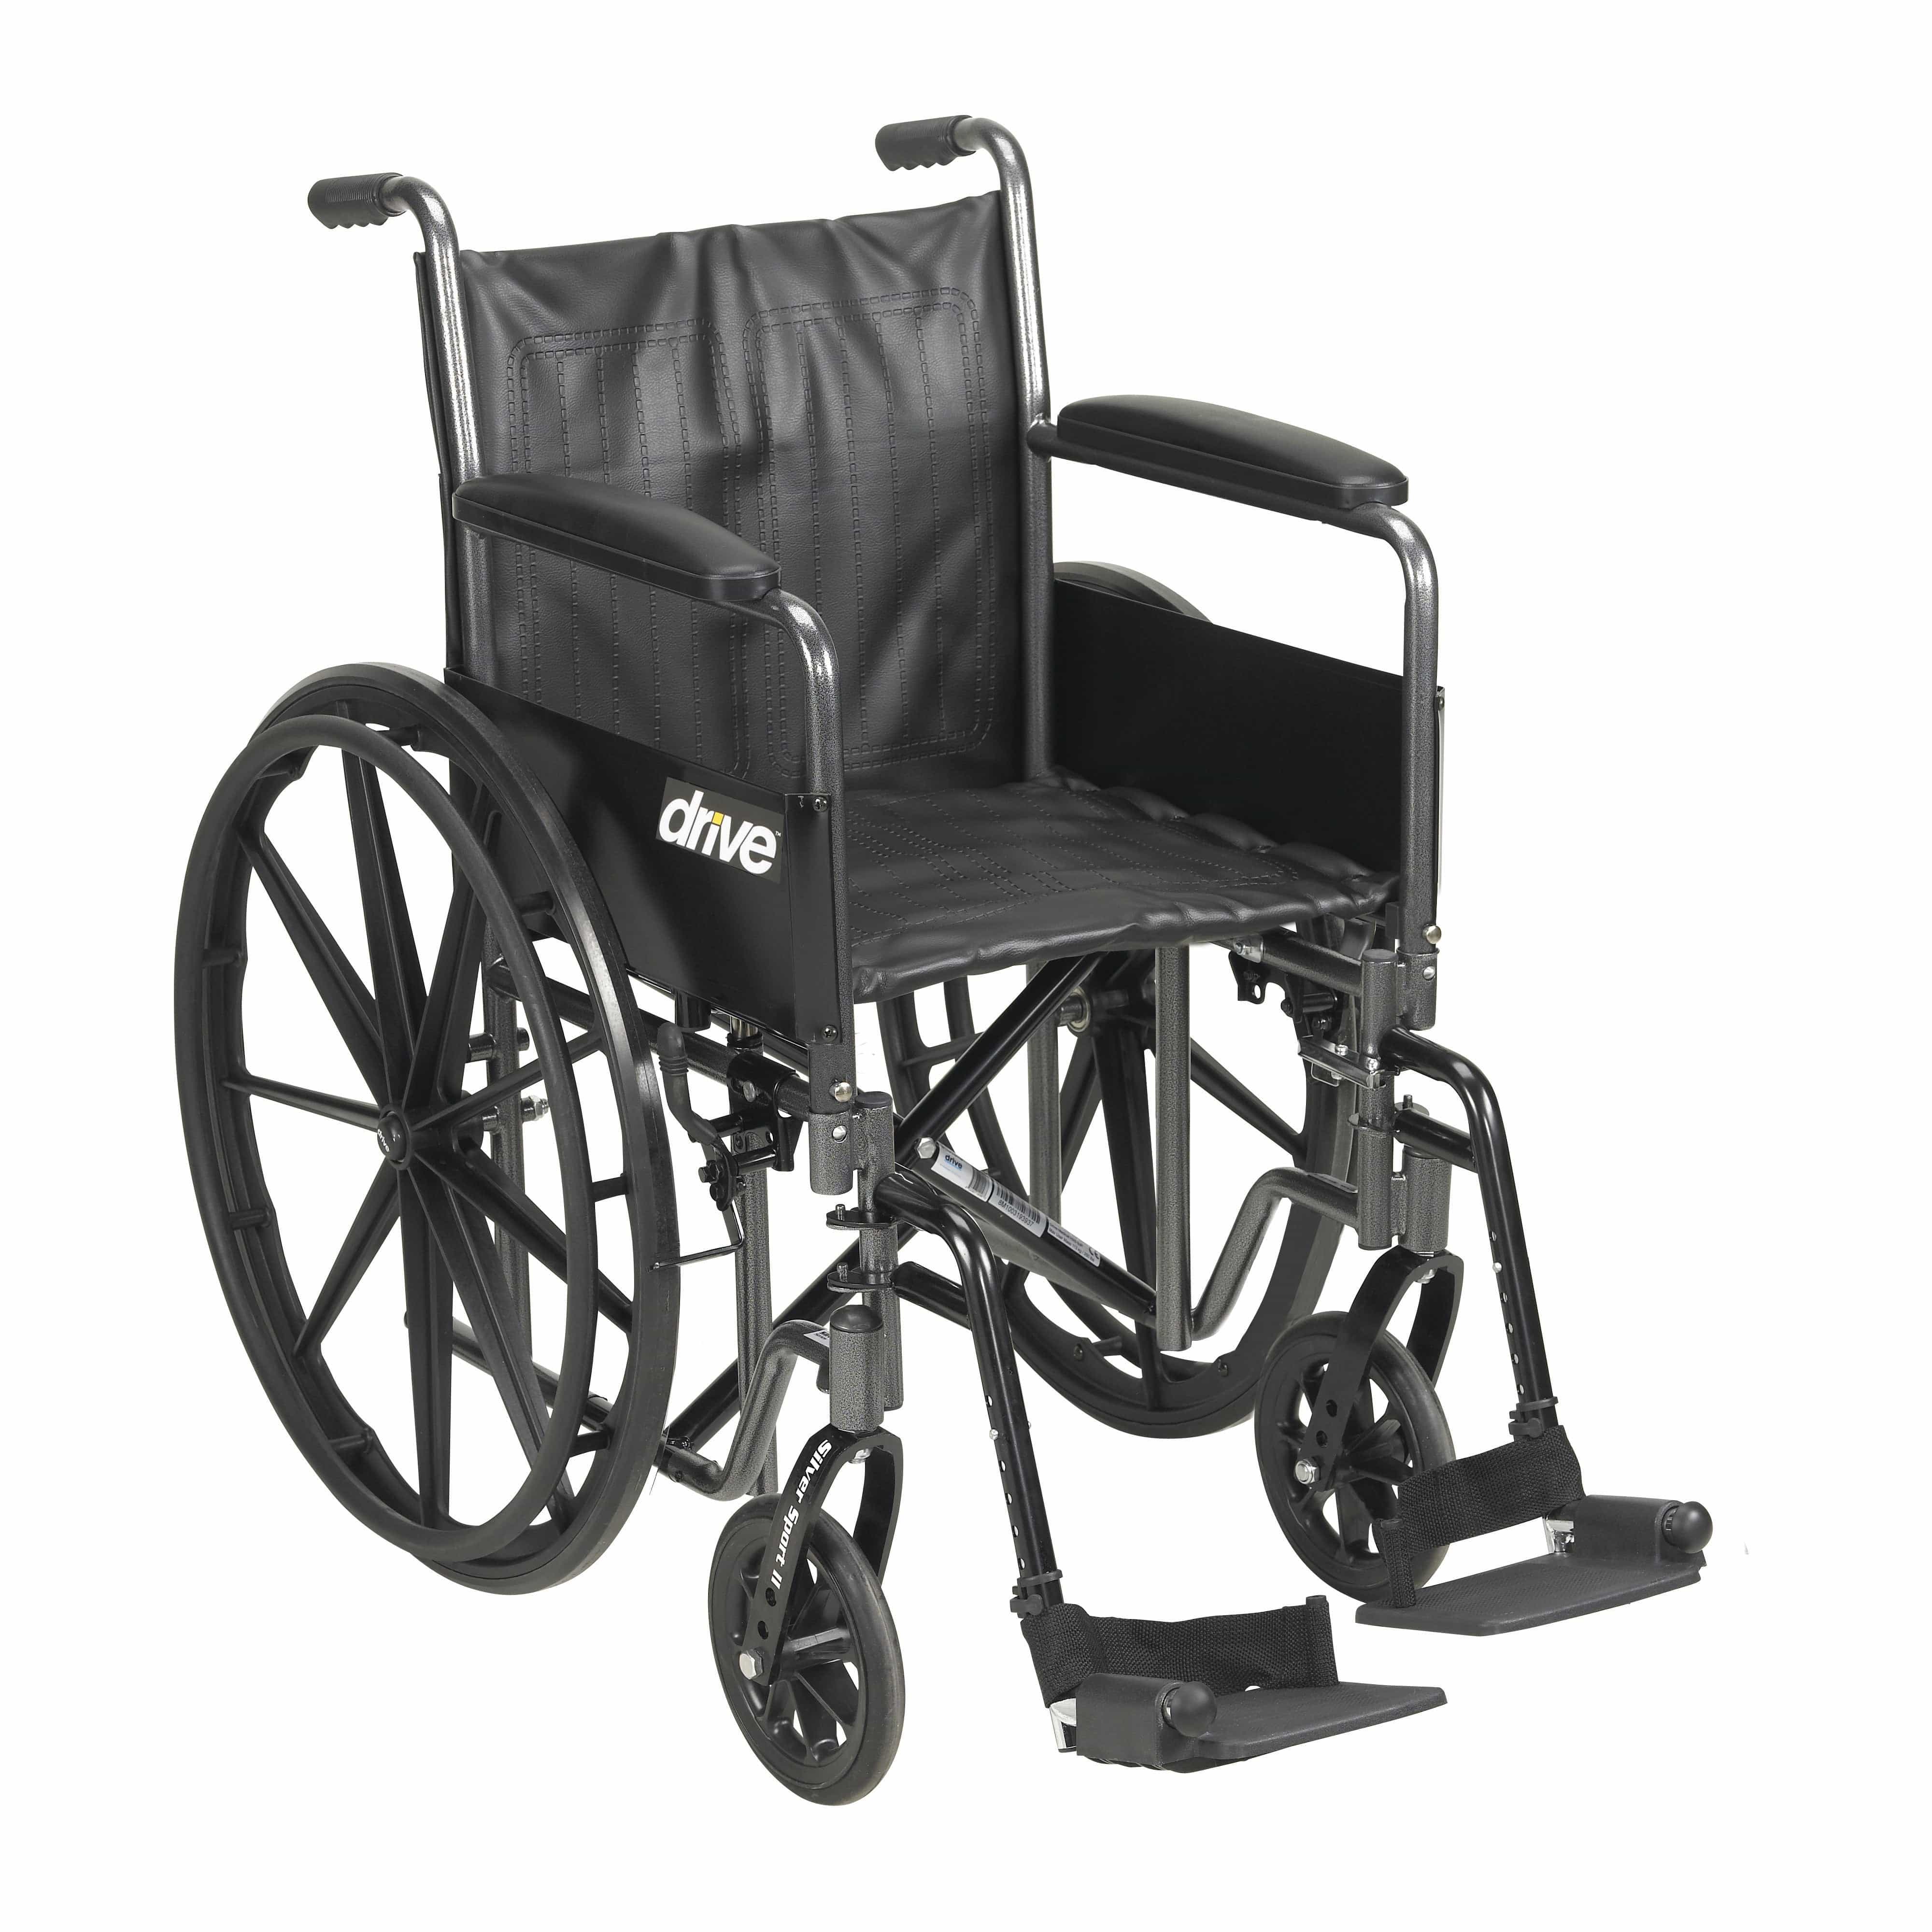 Drive Medical Wheelchairs/Standard Wheelchairs Detachable Full Arms and Swing away Footrests / 16" Seat Drive Medical Silver Sport 2 Wheelchair